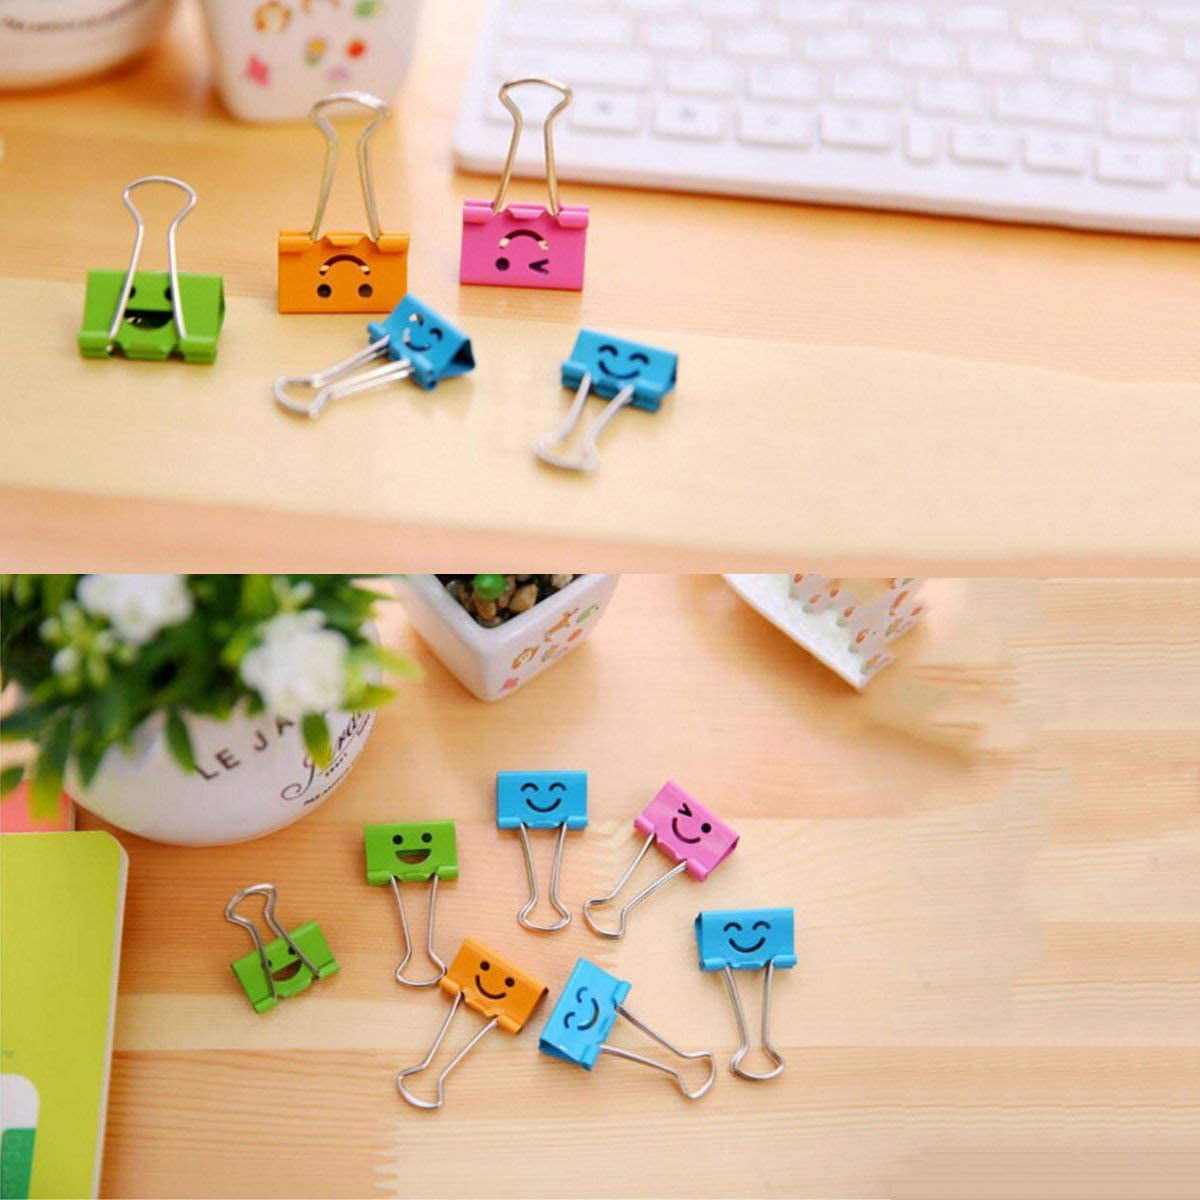 Binder Clips 40Pcs Cute Smiley face Metal Foldback Clips for Office School Photo Wall Multicolor 